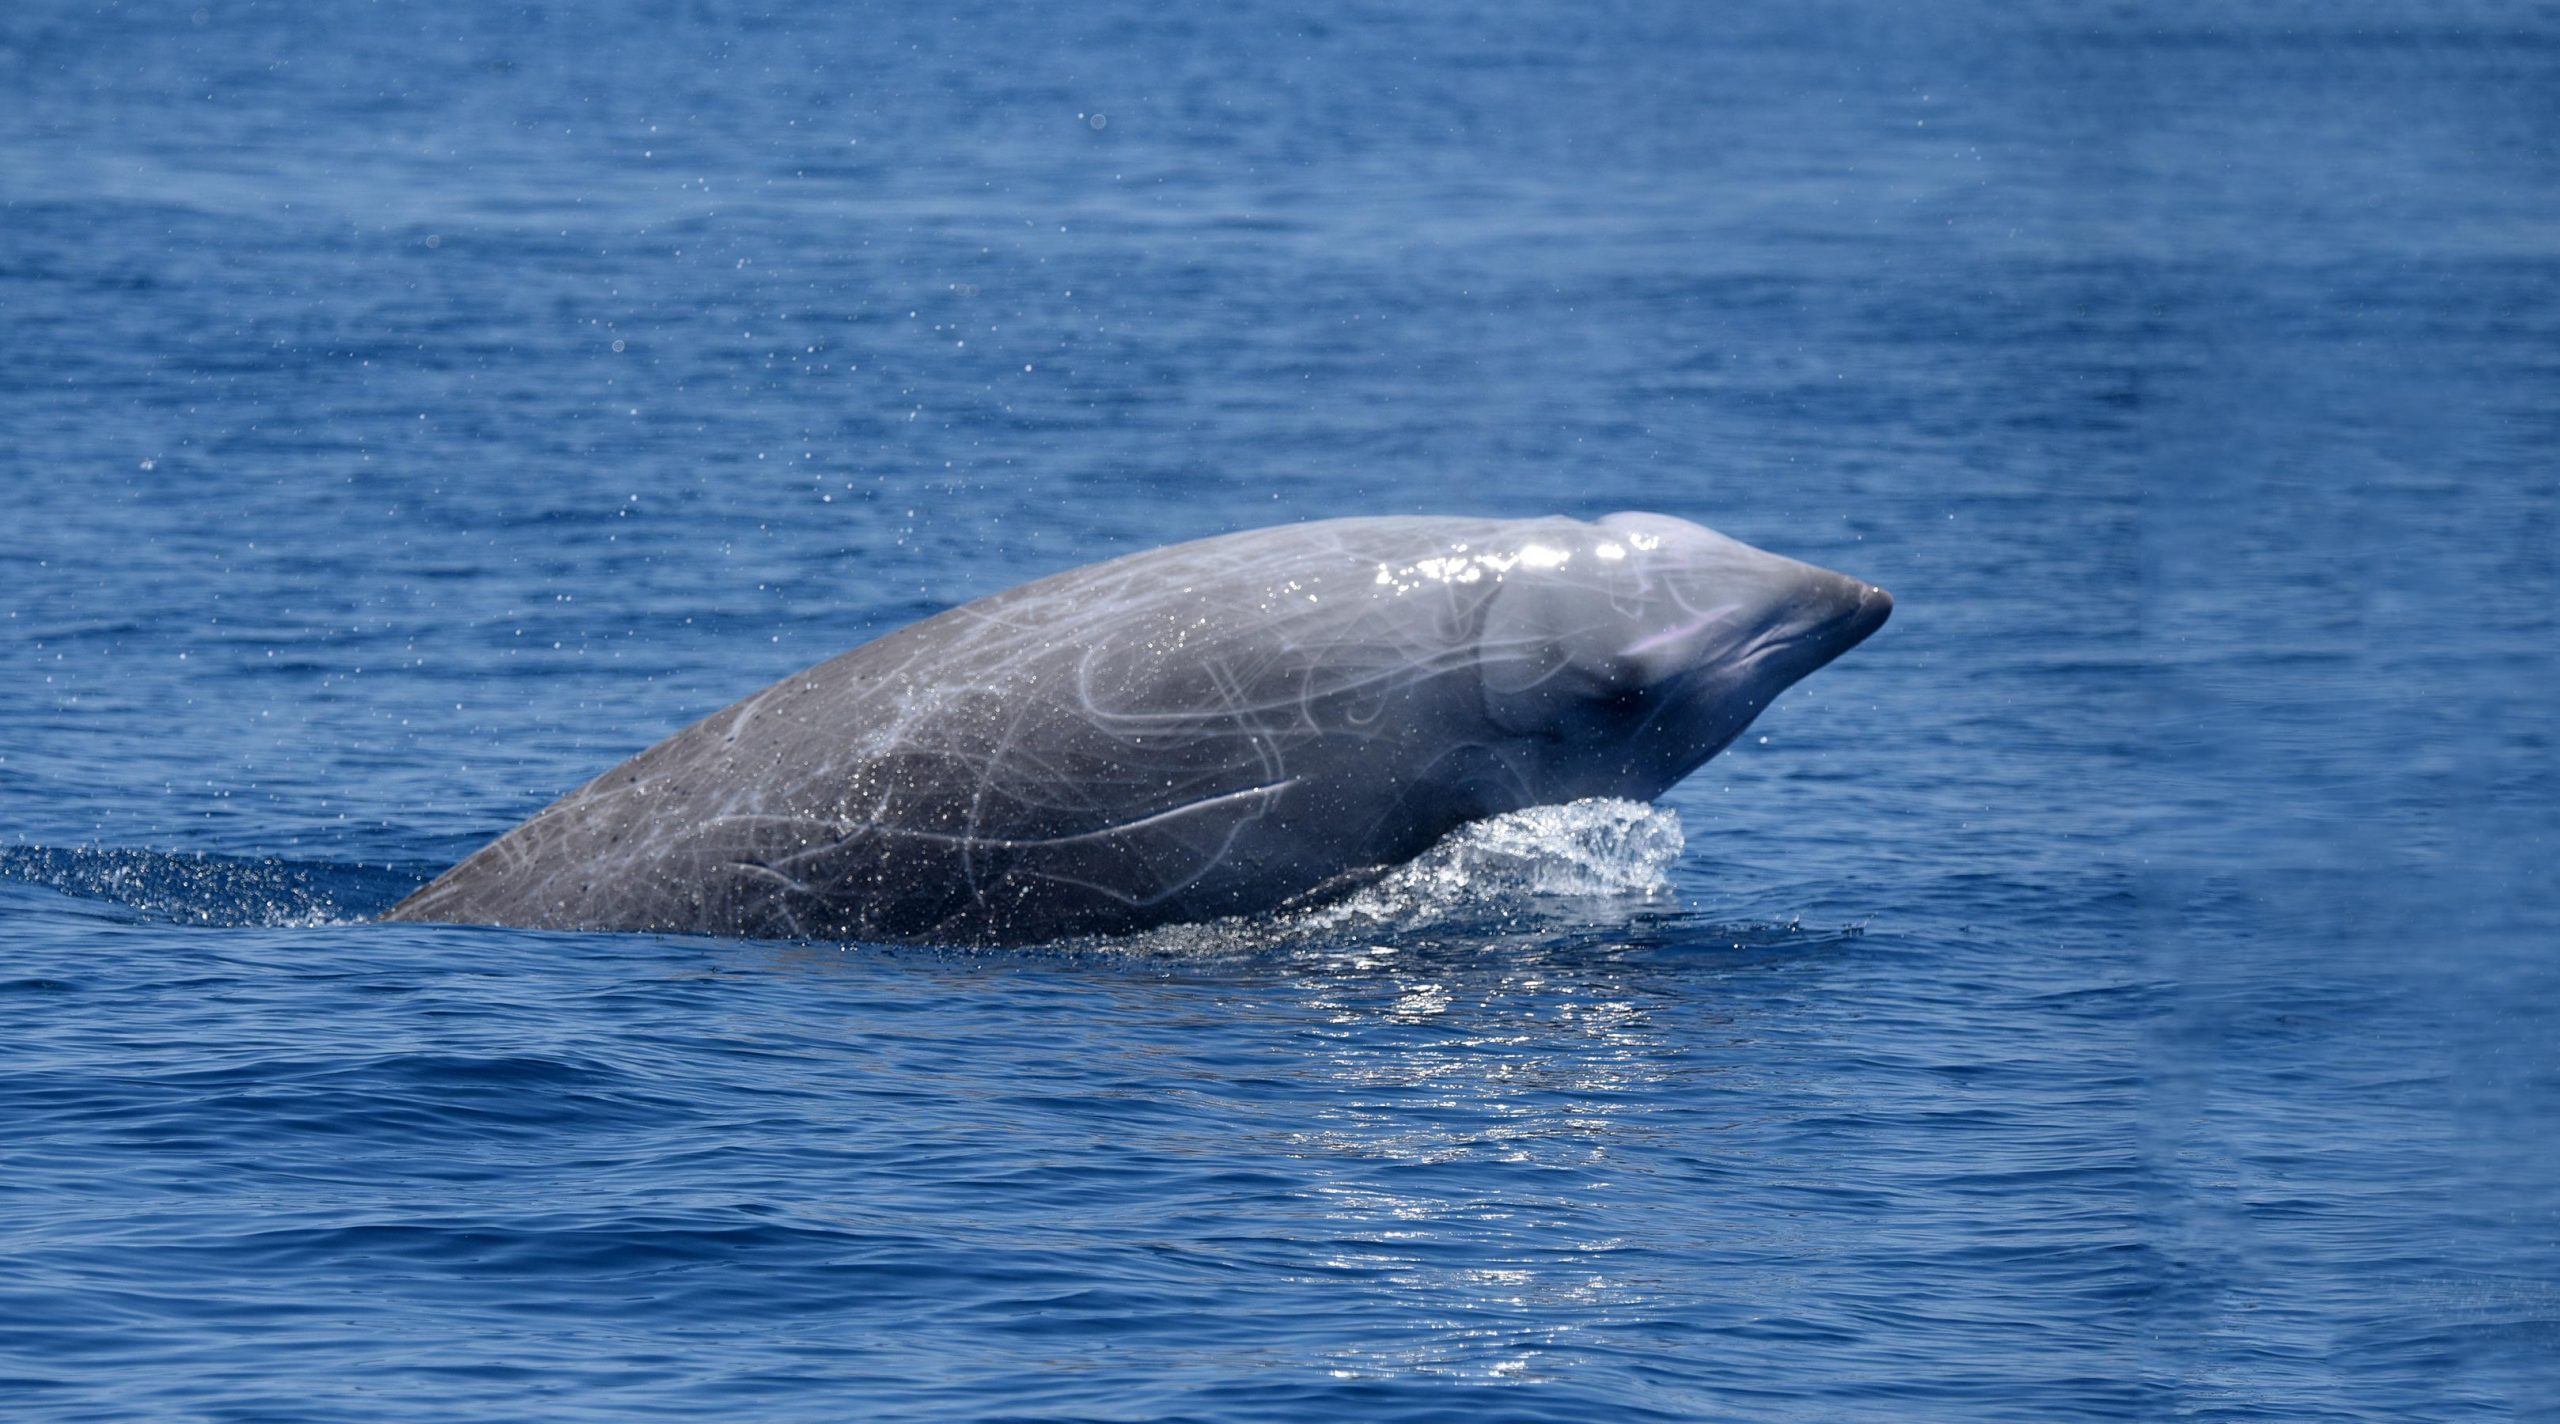 Extreme Diving in Mammals: Cuvier’s Beaked Whale Breaks Record With 3